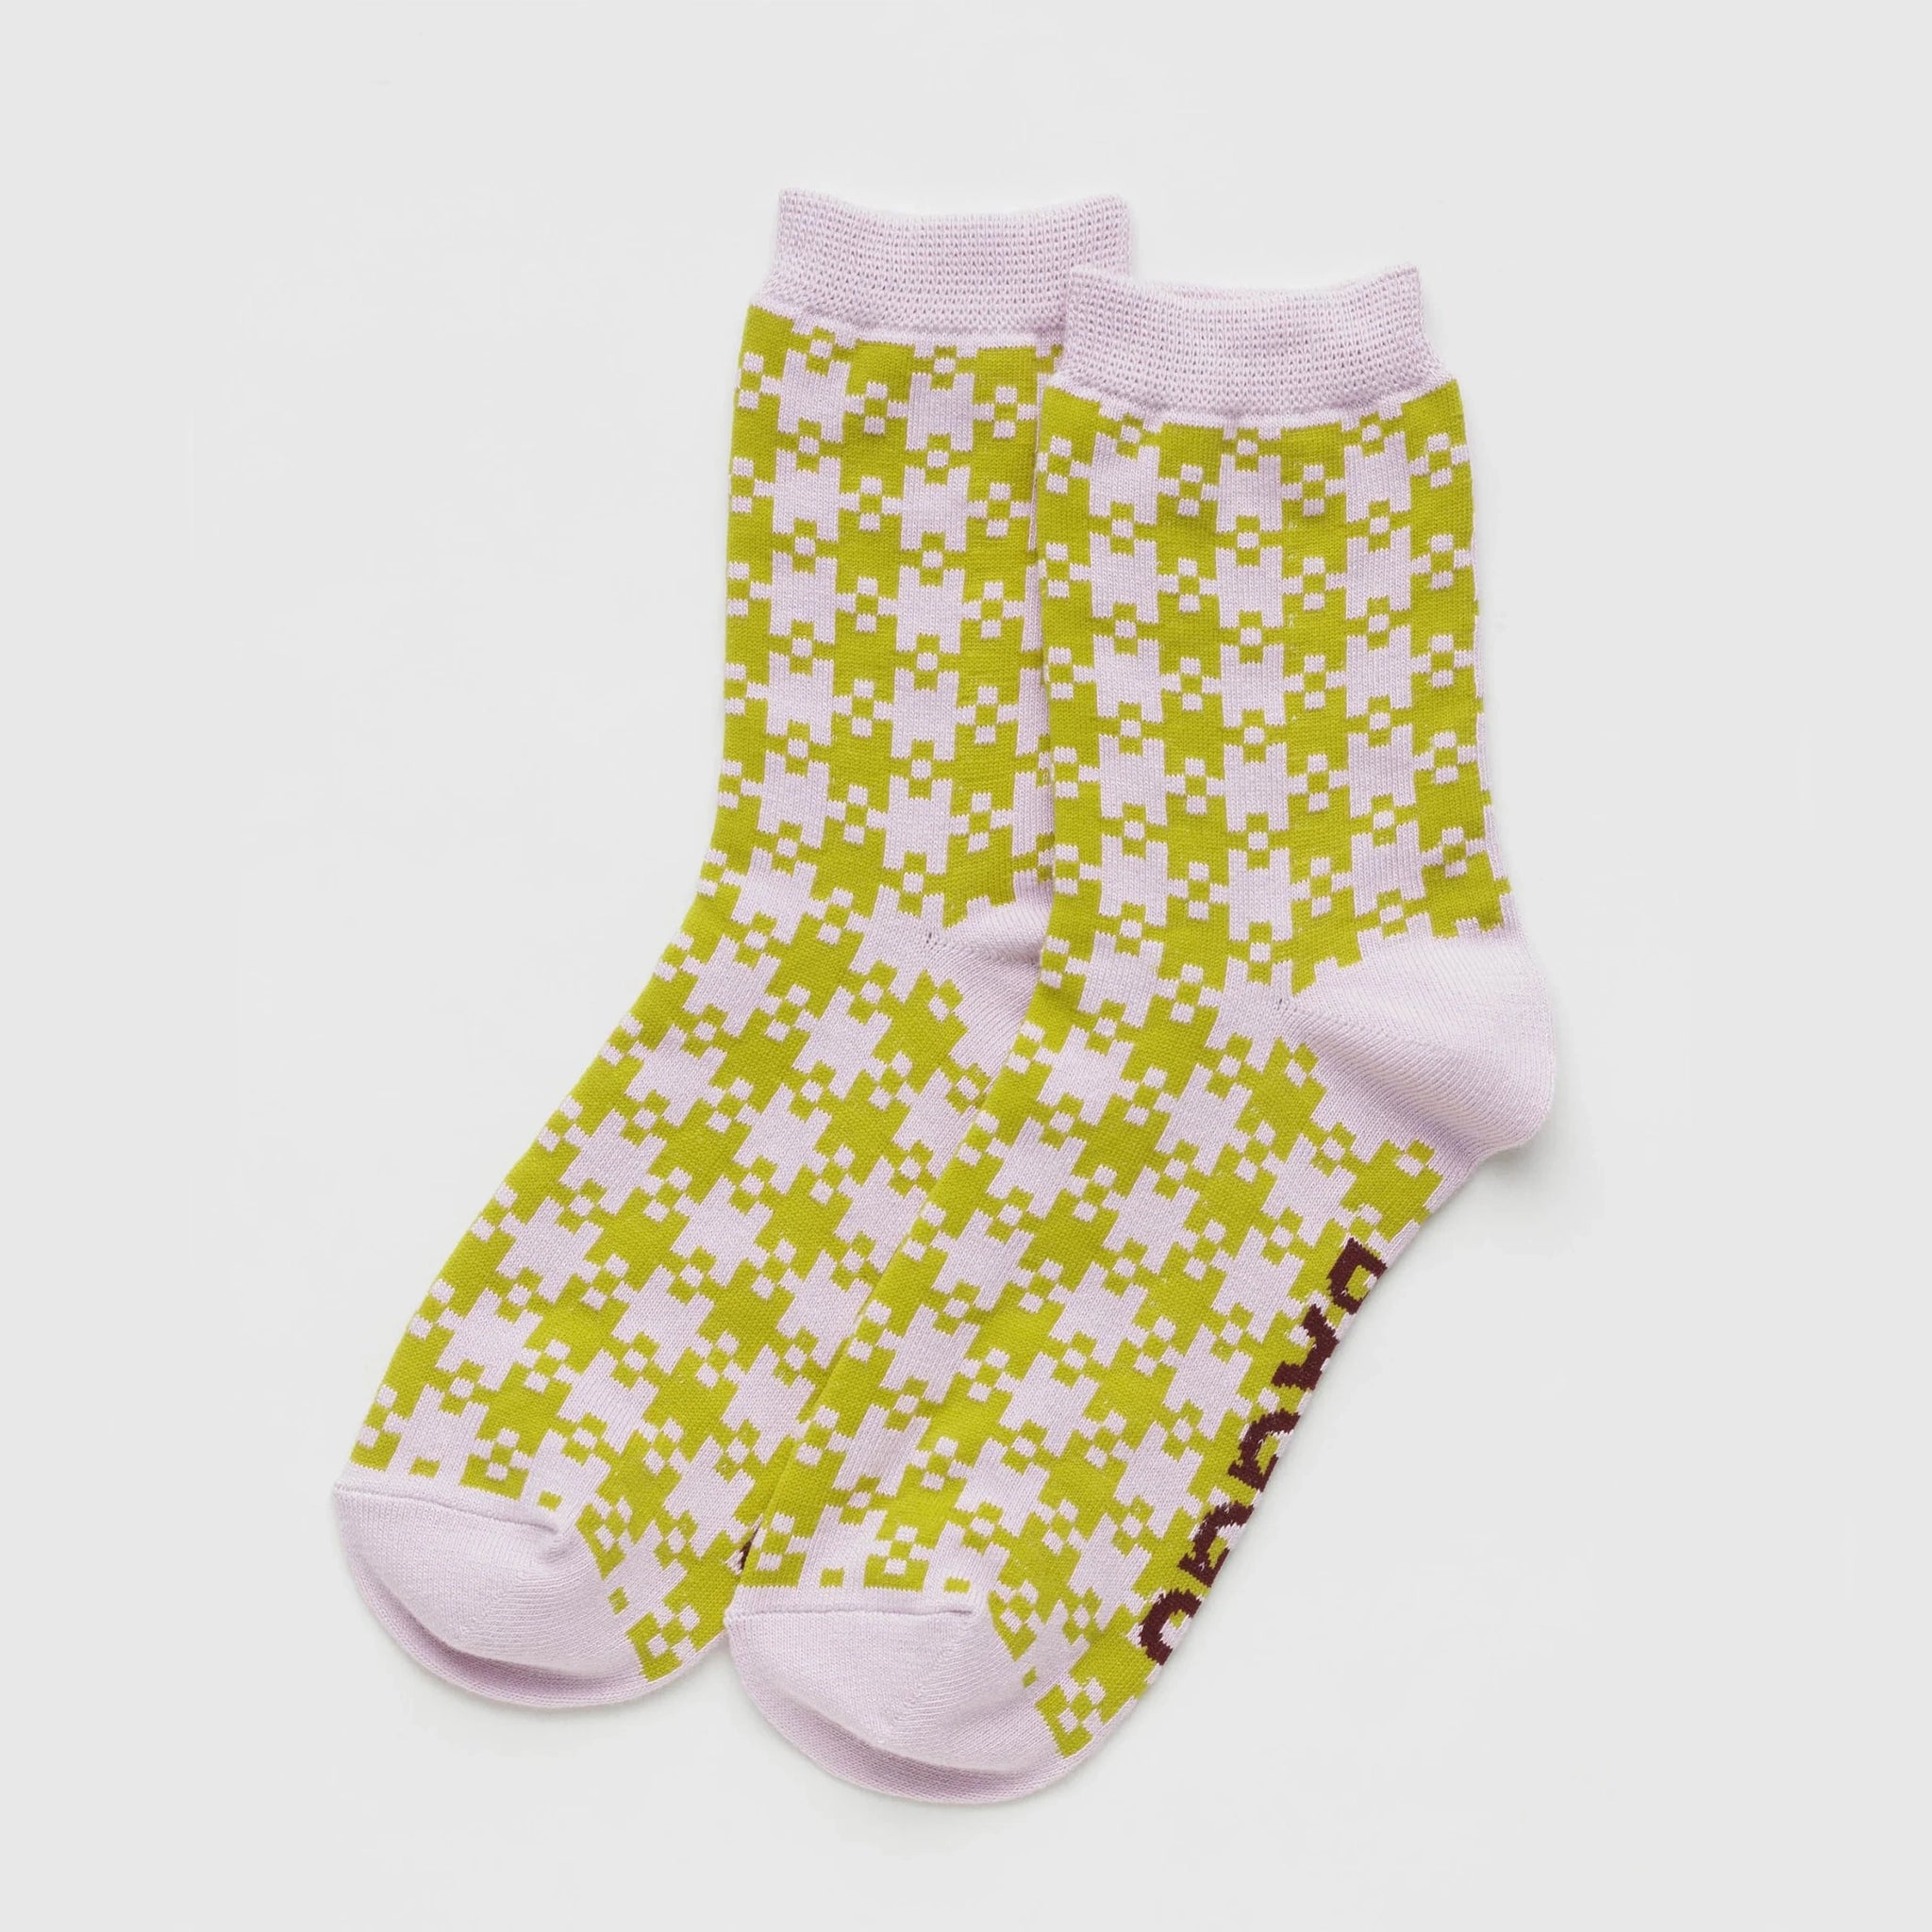 On a white background is a pair of pink and green gingham printed socks. 